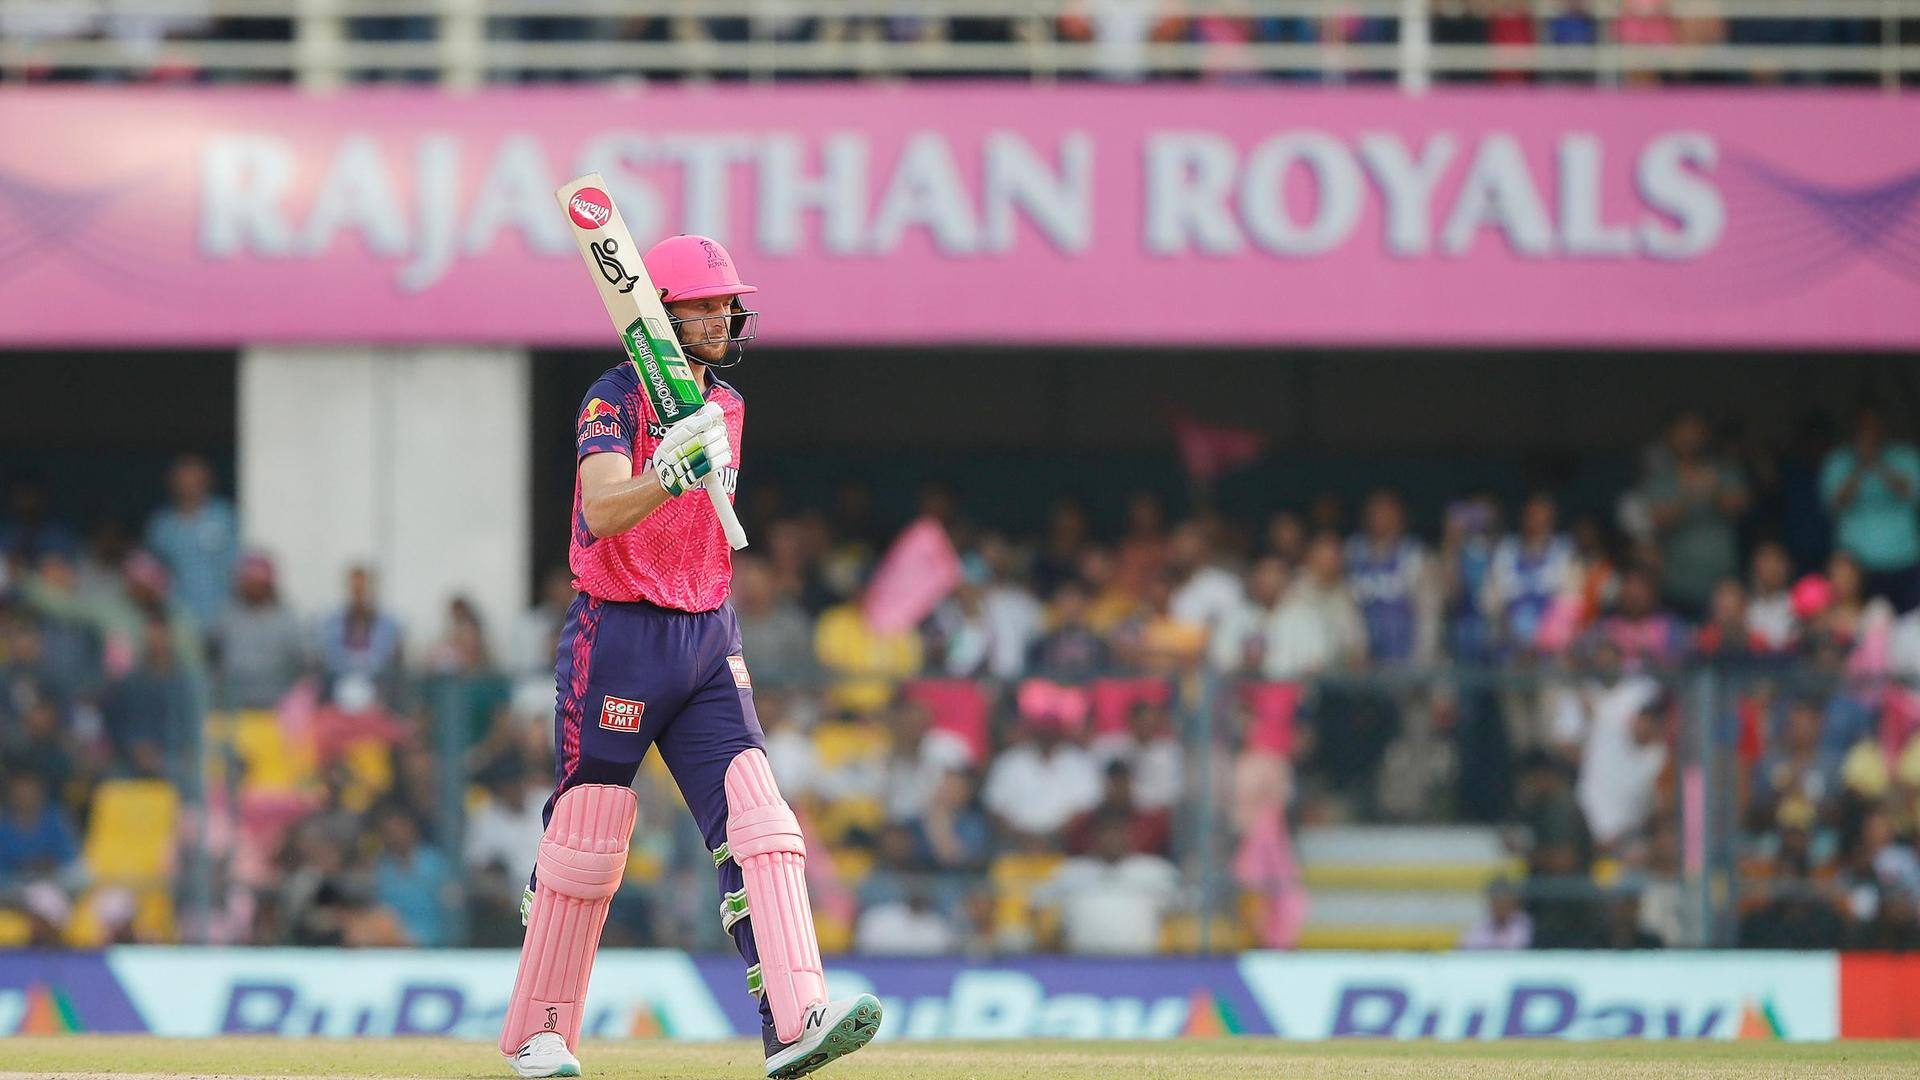 IPL 2023: Jaiswal, Buttler power RR to 199/4 against DC